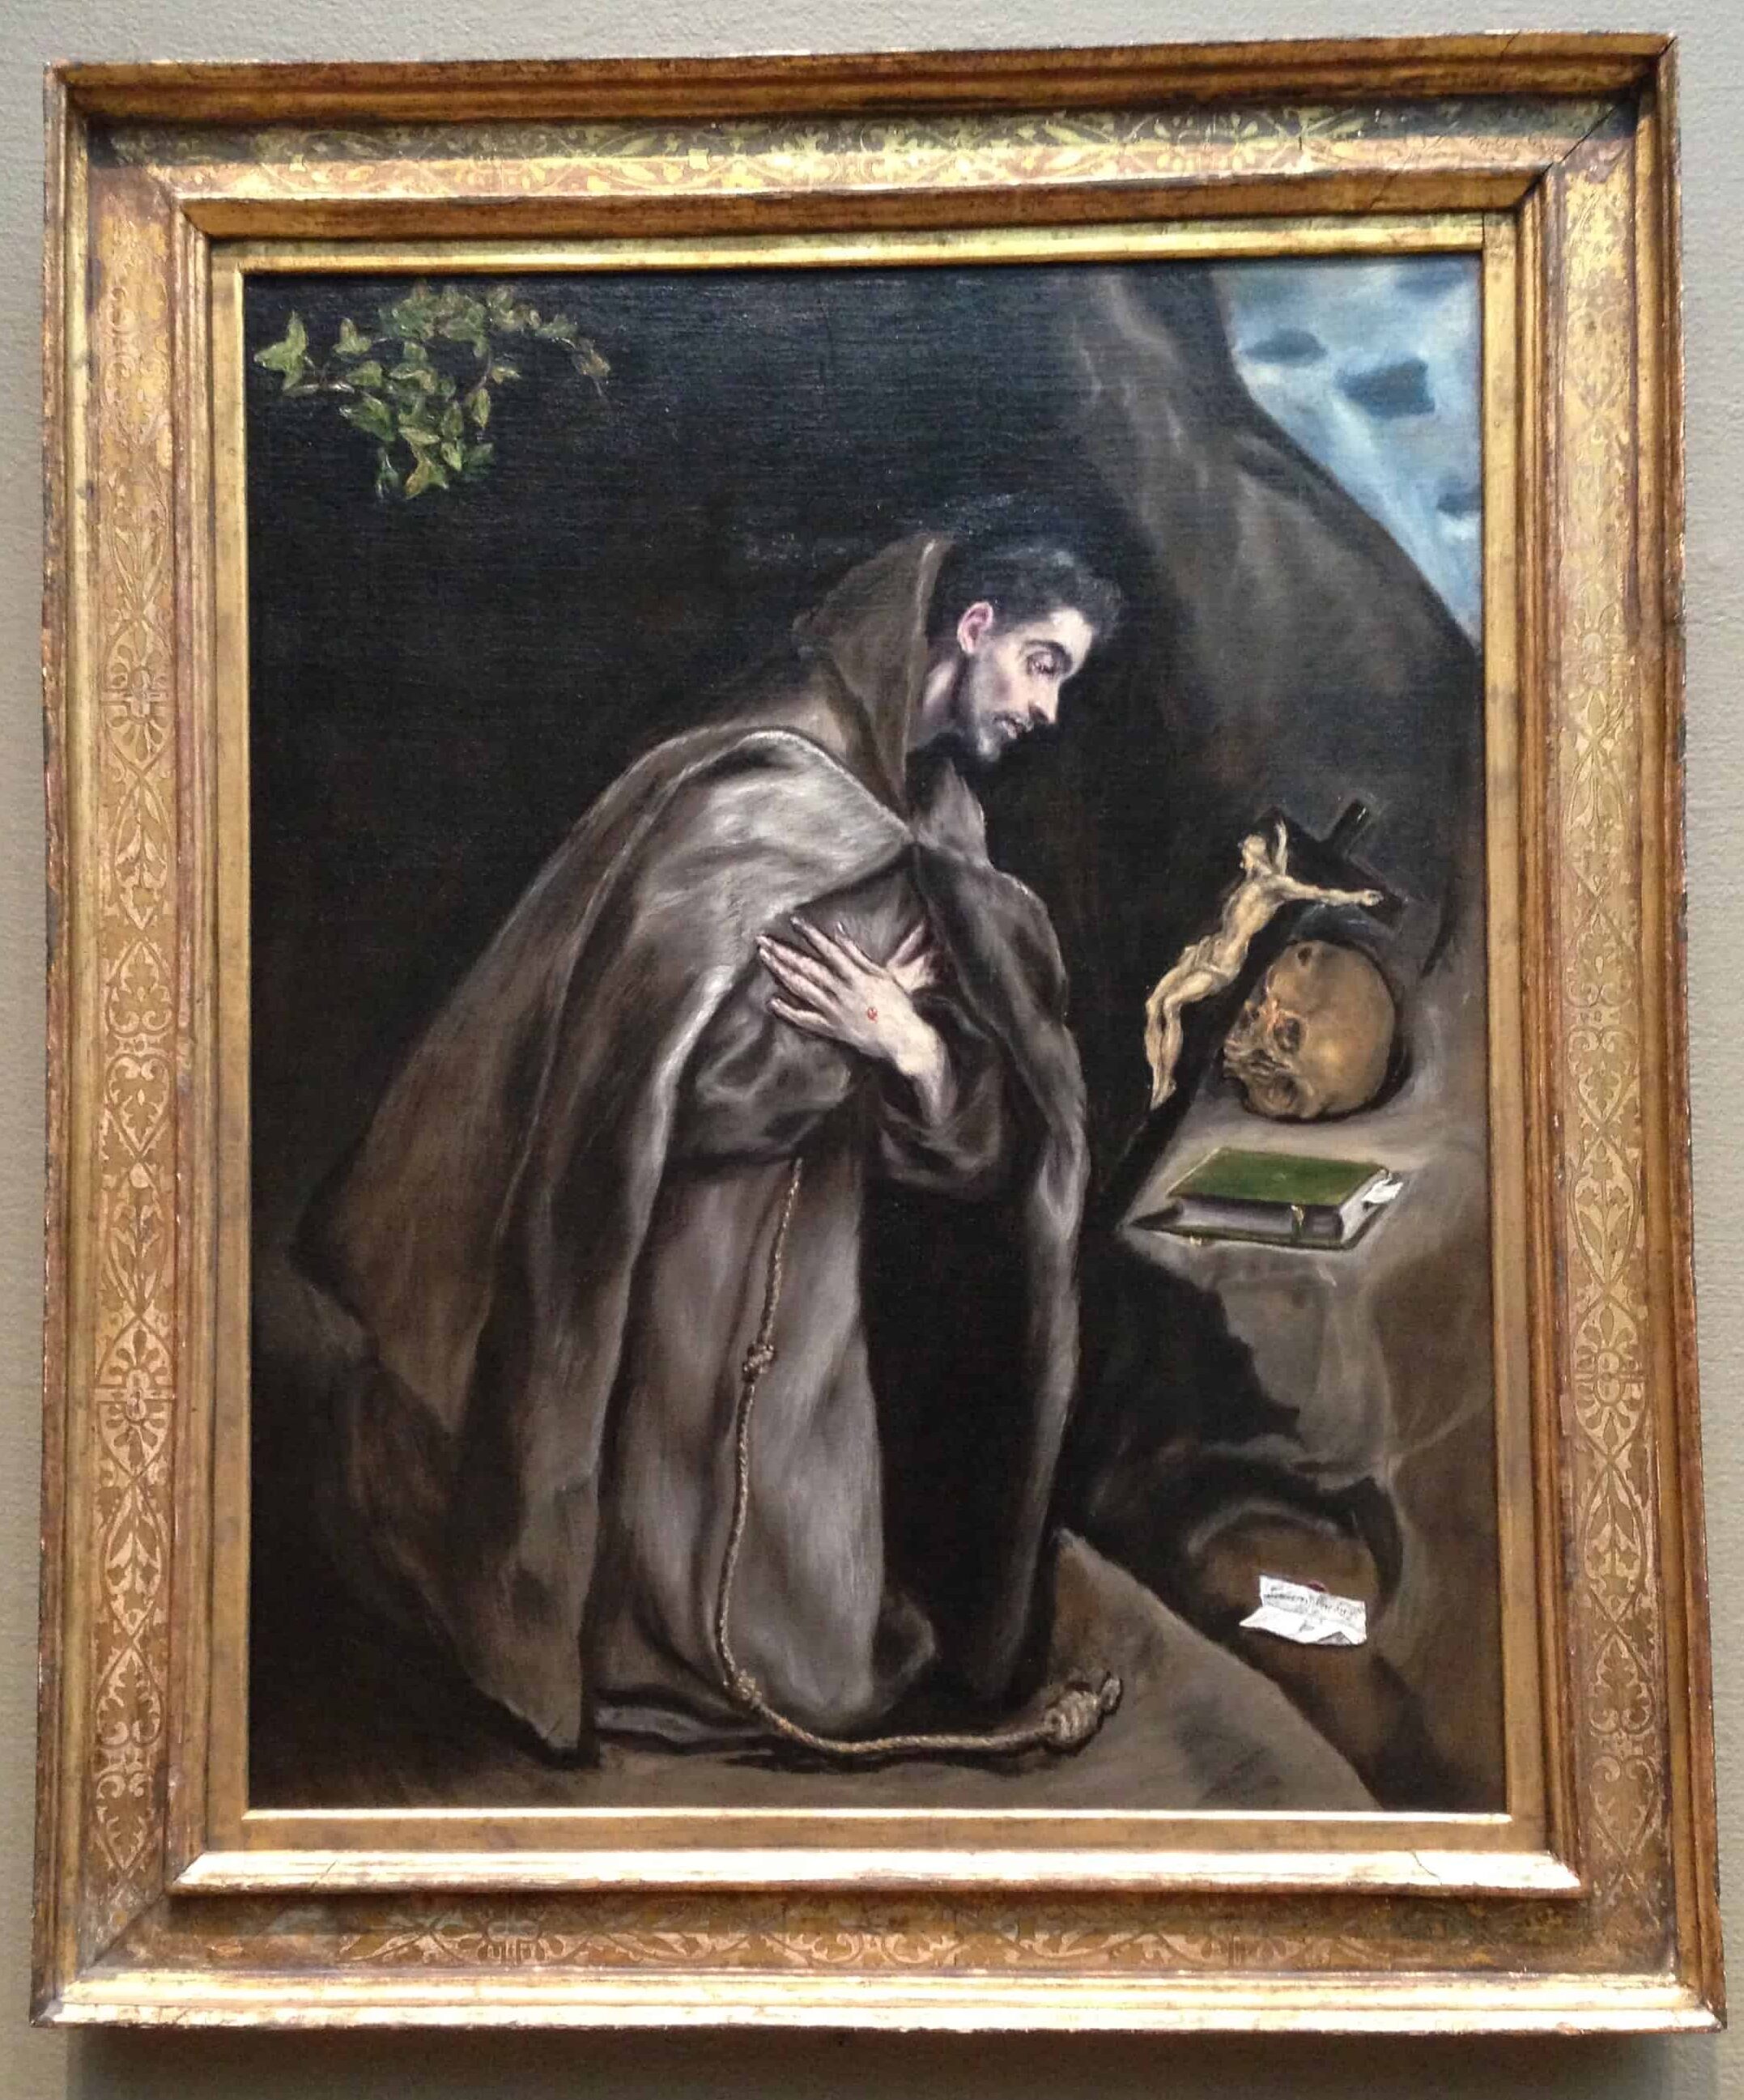 Saint Francis Kneeling in Meditation by El Greco (1595/1600) at the Art Institute of Chicago